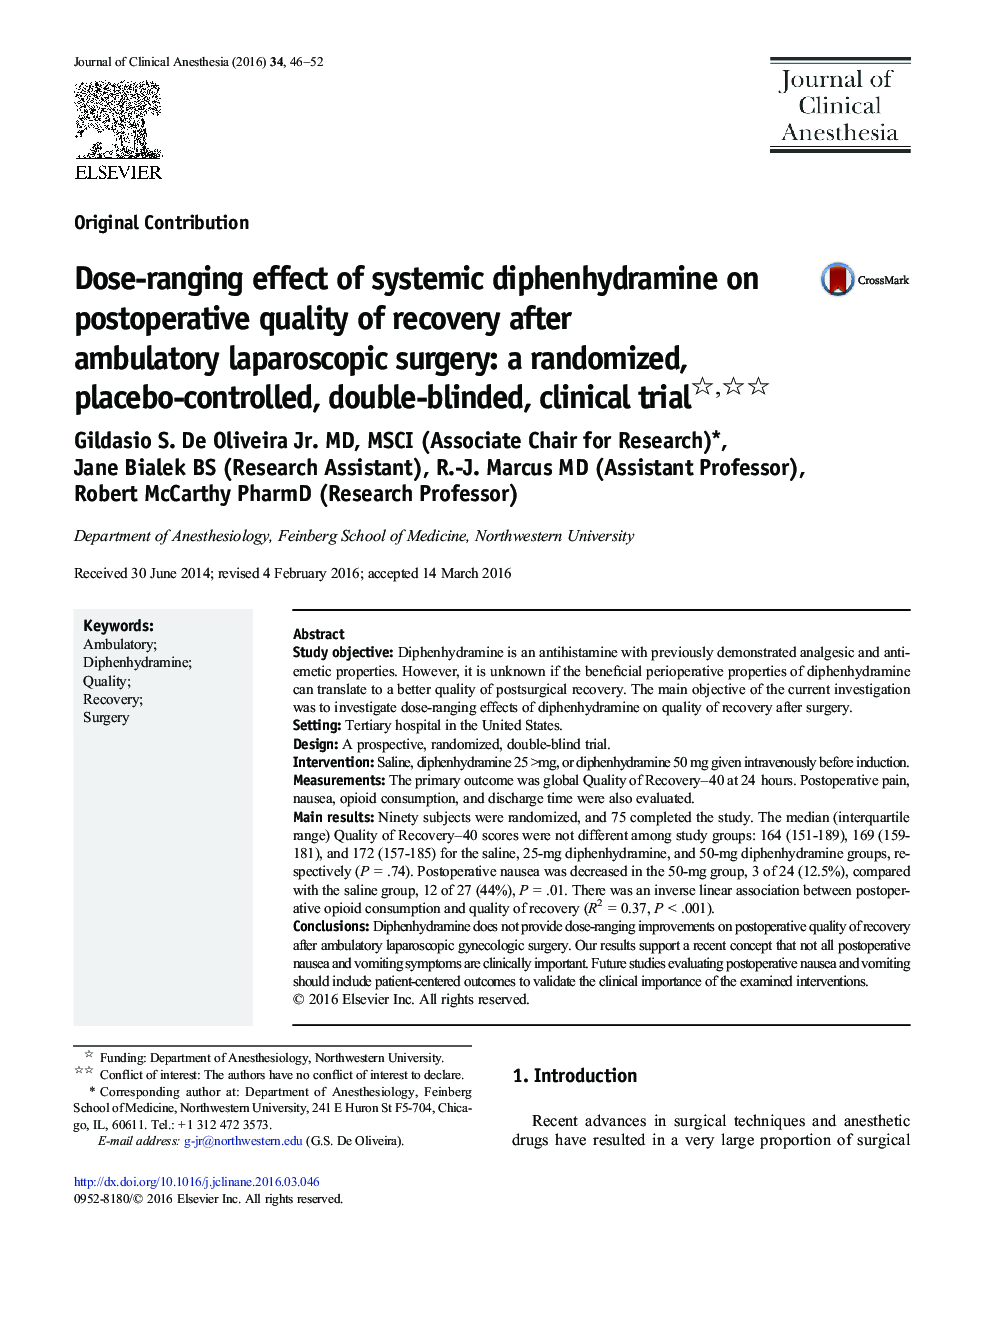 Original ContributionDose-ranging effect of systemic diphenhydramine on postoperative quality of recovery after ambulatory laparoscopic surgery: a randomized, placebo-controlled, double-blinded, clinical trial